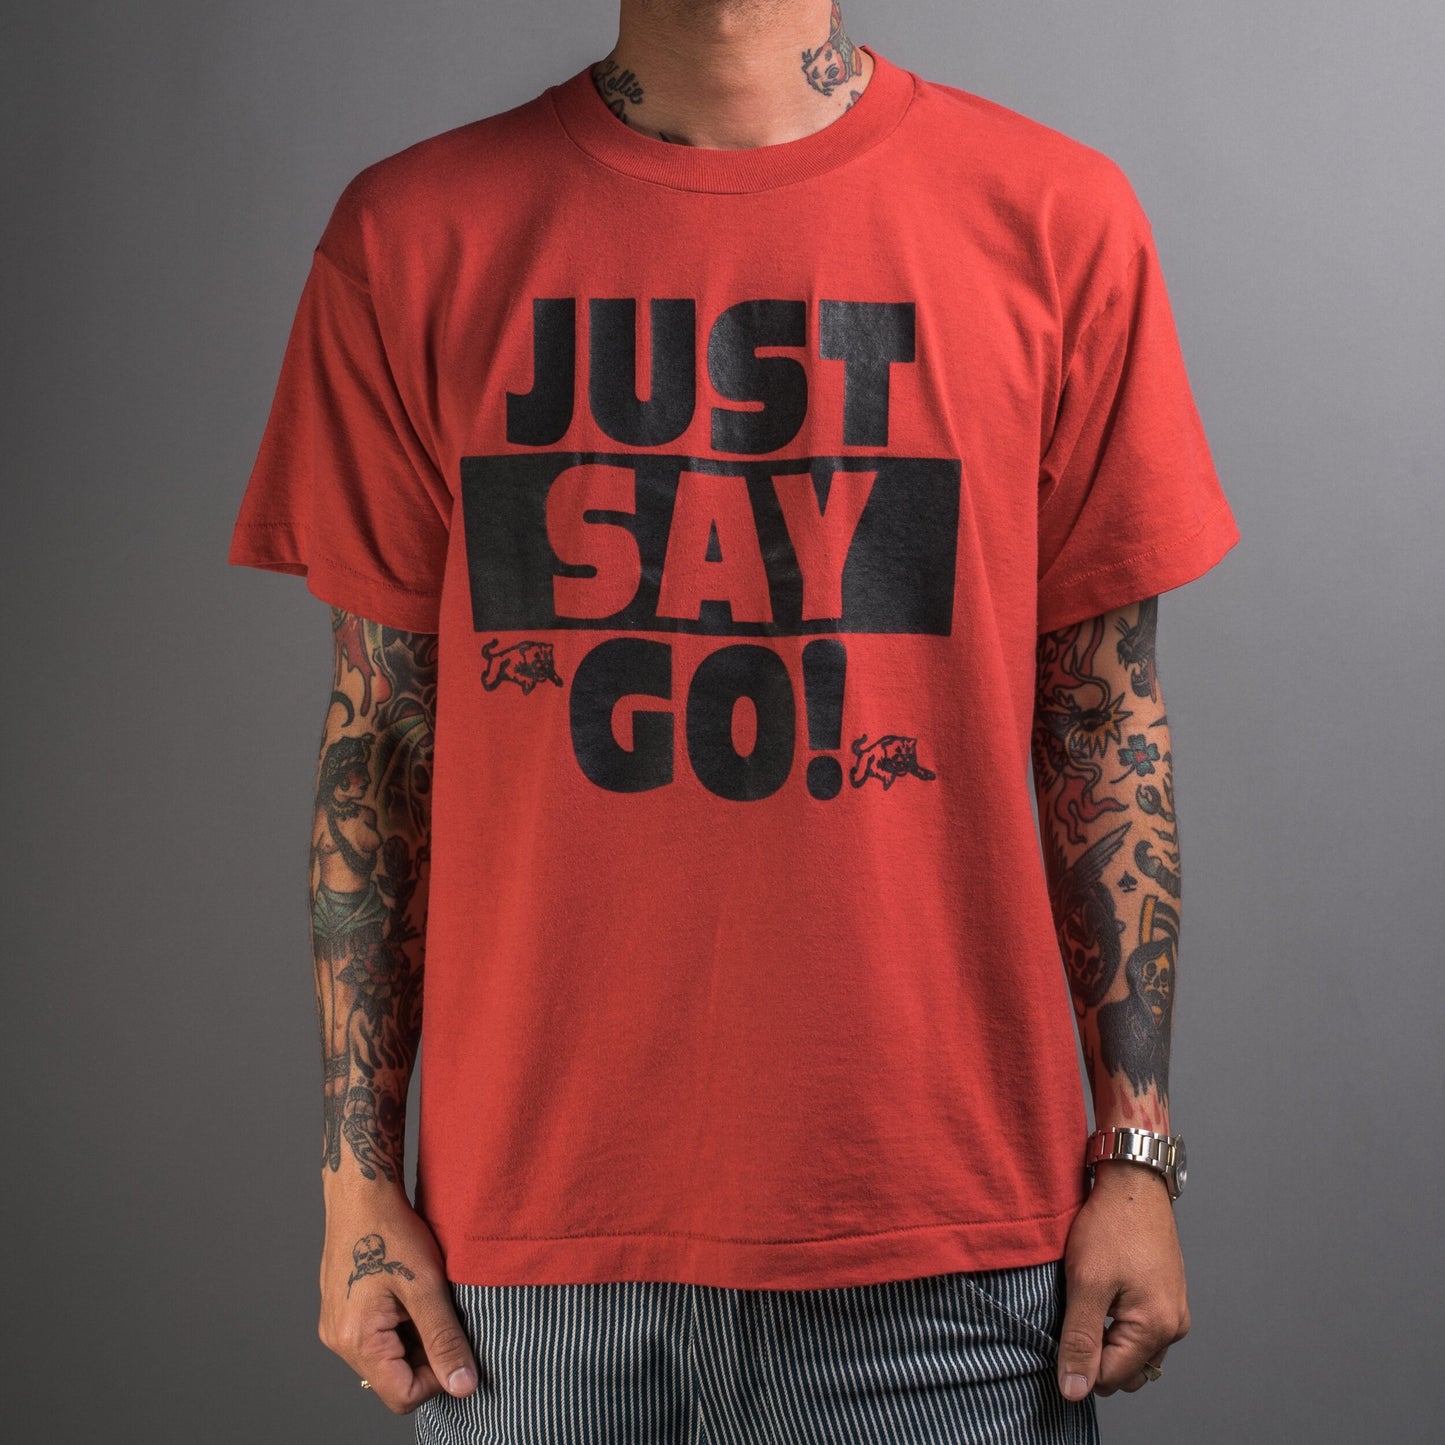 Vintage 90’s Go! Just Say Go! T-Shirt